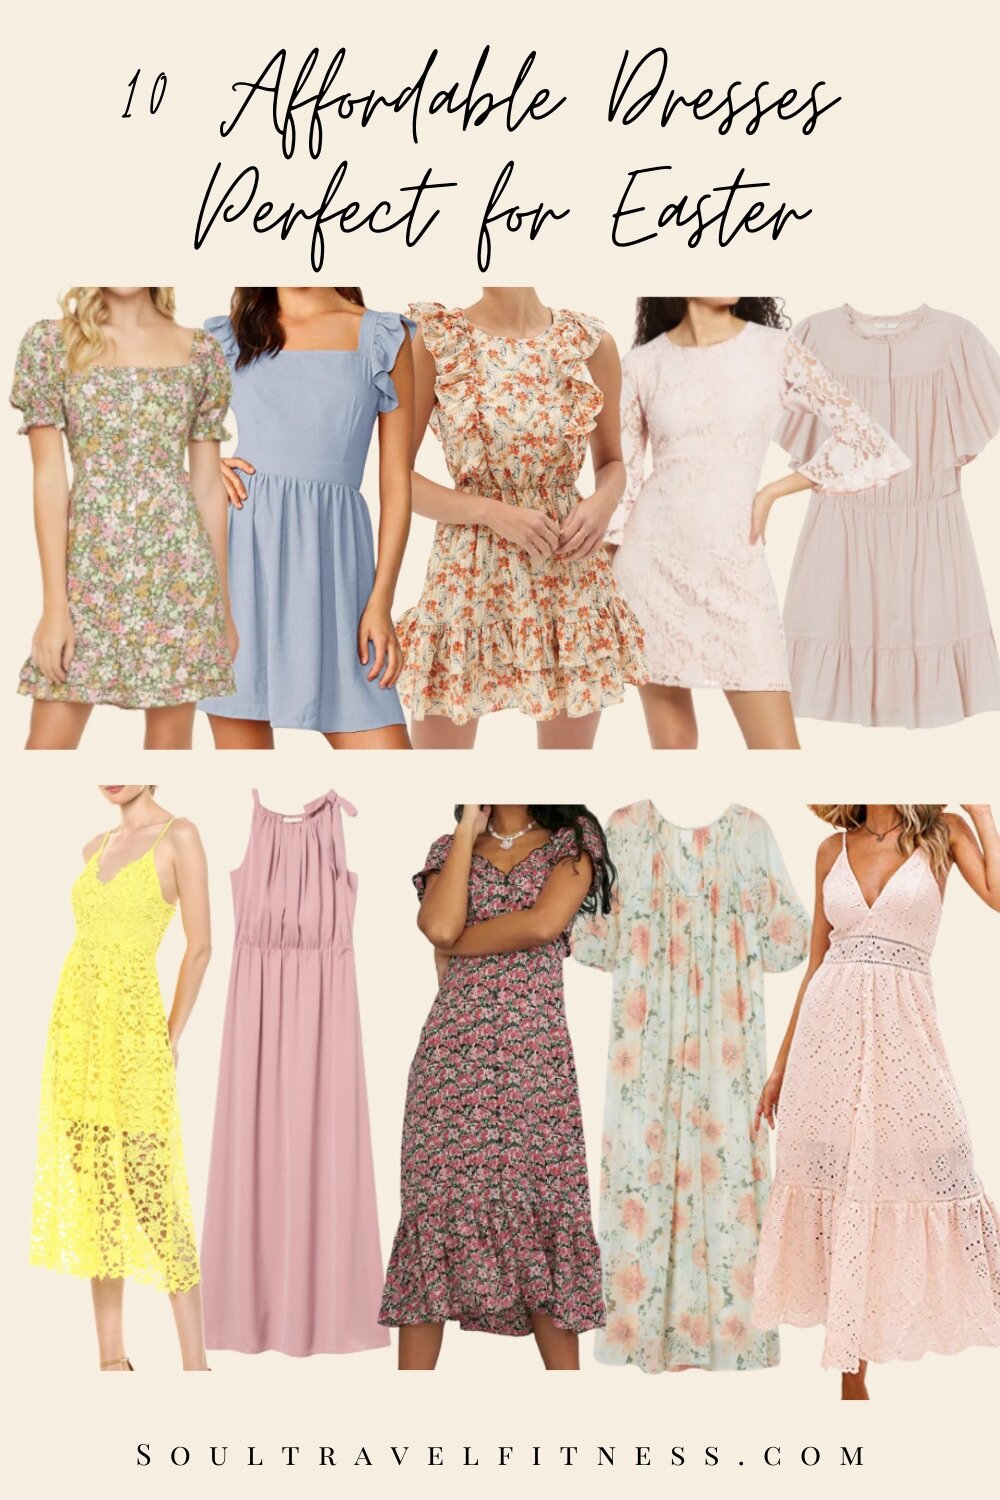 12 Easter Dresses For Women – Being Ecomomical